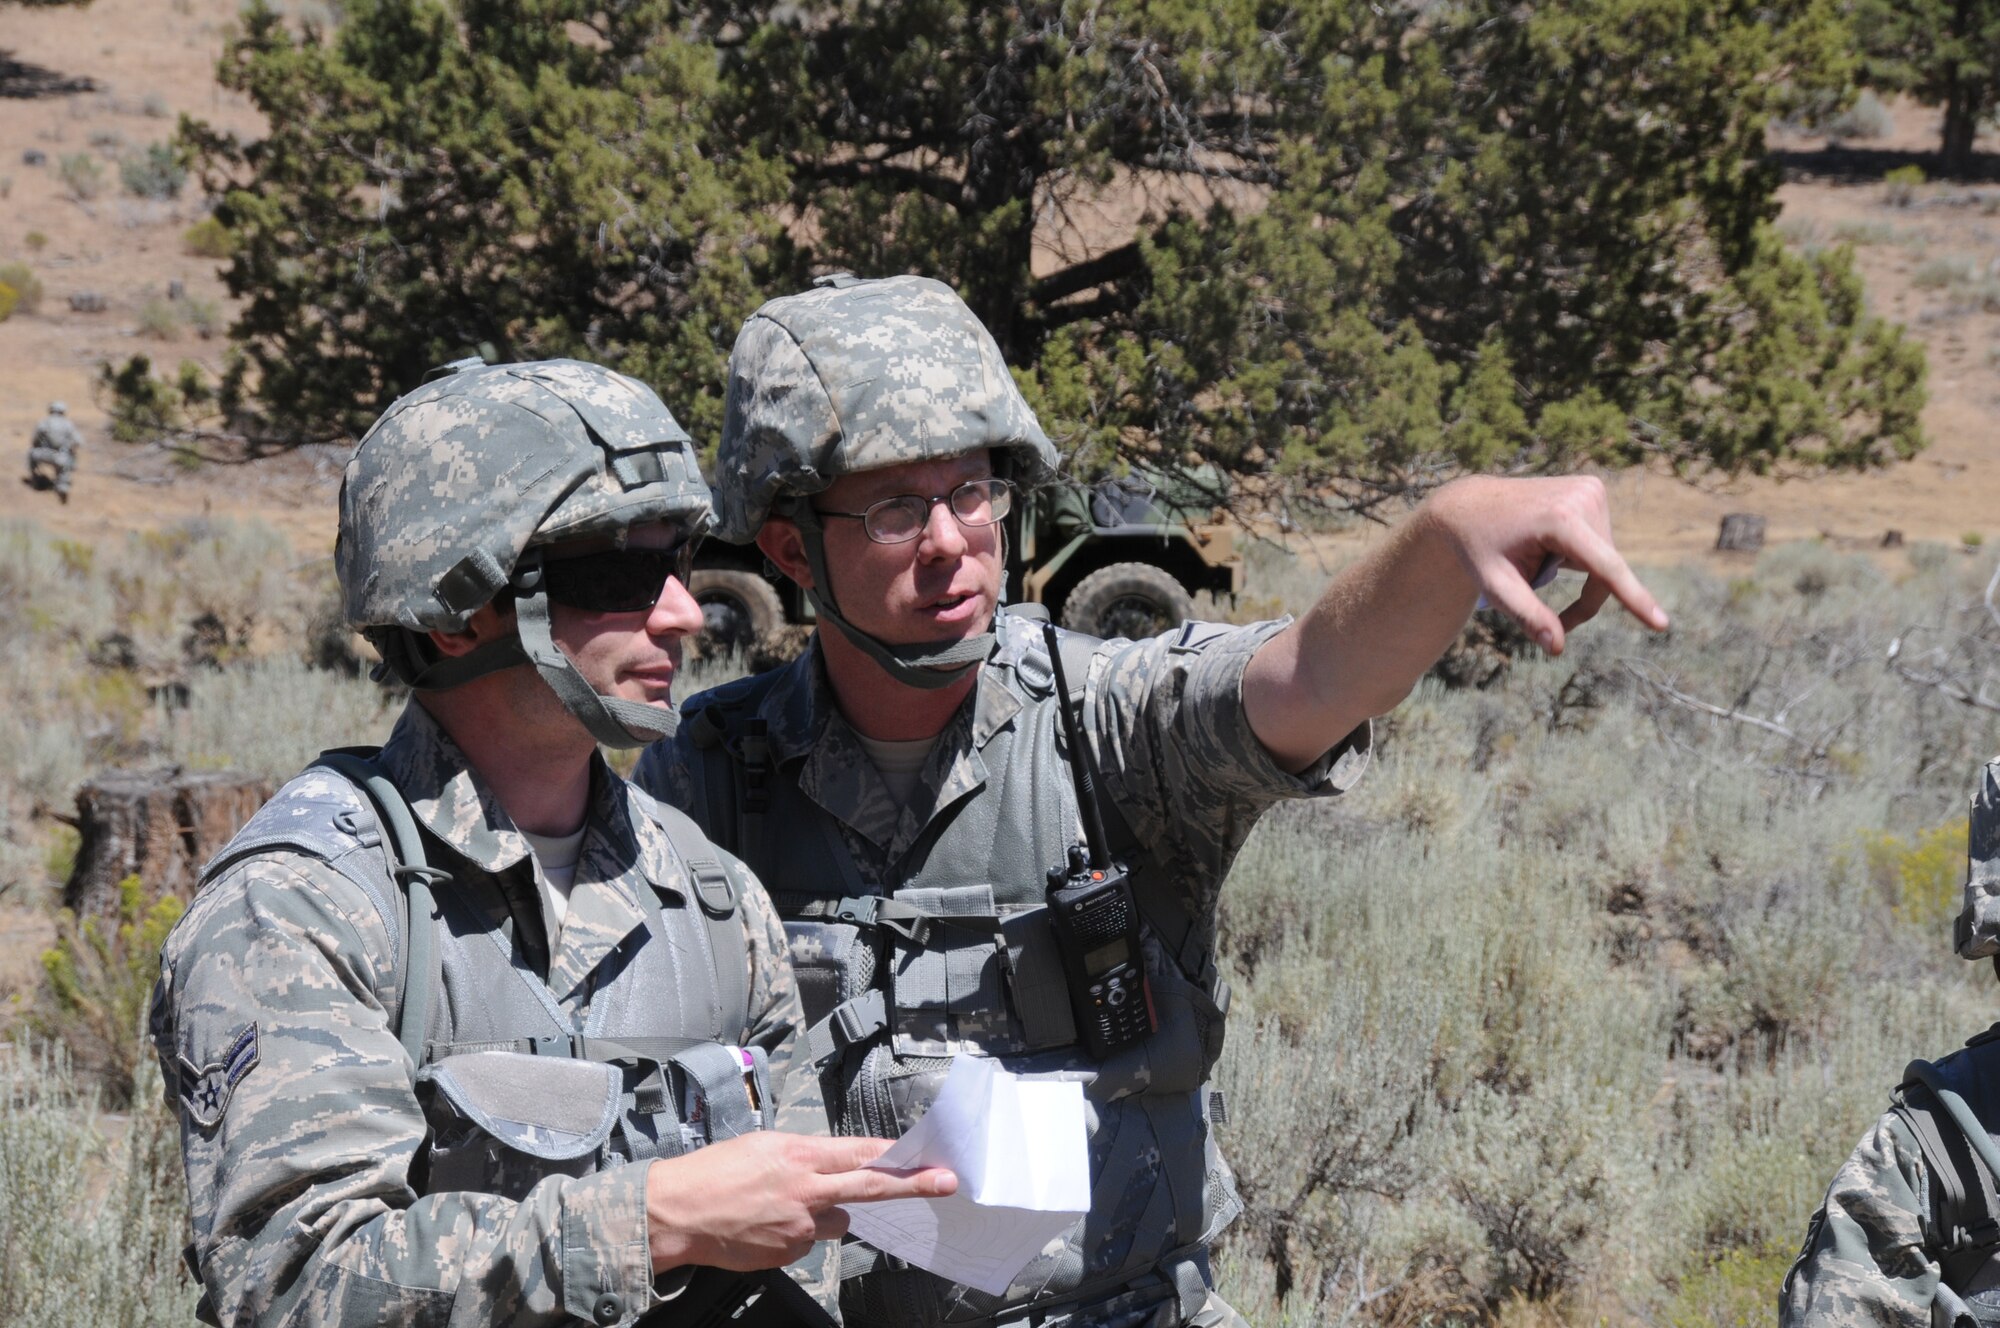 U.S. Air Force Master Sgt. Michael Moore directs Airman 1st Class Garrett Leanders, both of 270th Air Traffic Control Squadron,  on how to form up a perimeter during an area defense exercise July 24, near Bonanza, Oregon. The 270th ATCS controls the airspace for Kingsley Field but also has an expeditionary tasking; this year’s annual training emphasized that capability and involved several exercises off base. (U.S. Air National Guard photo by Tech. Sgt. Jefferson Thompson/Released)